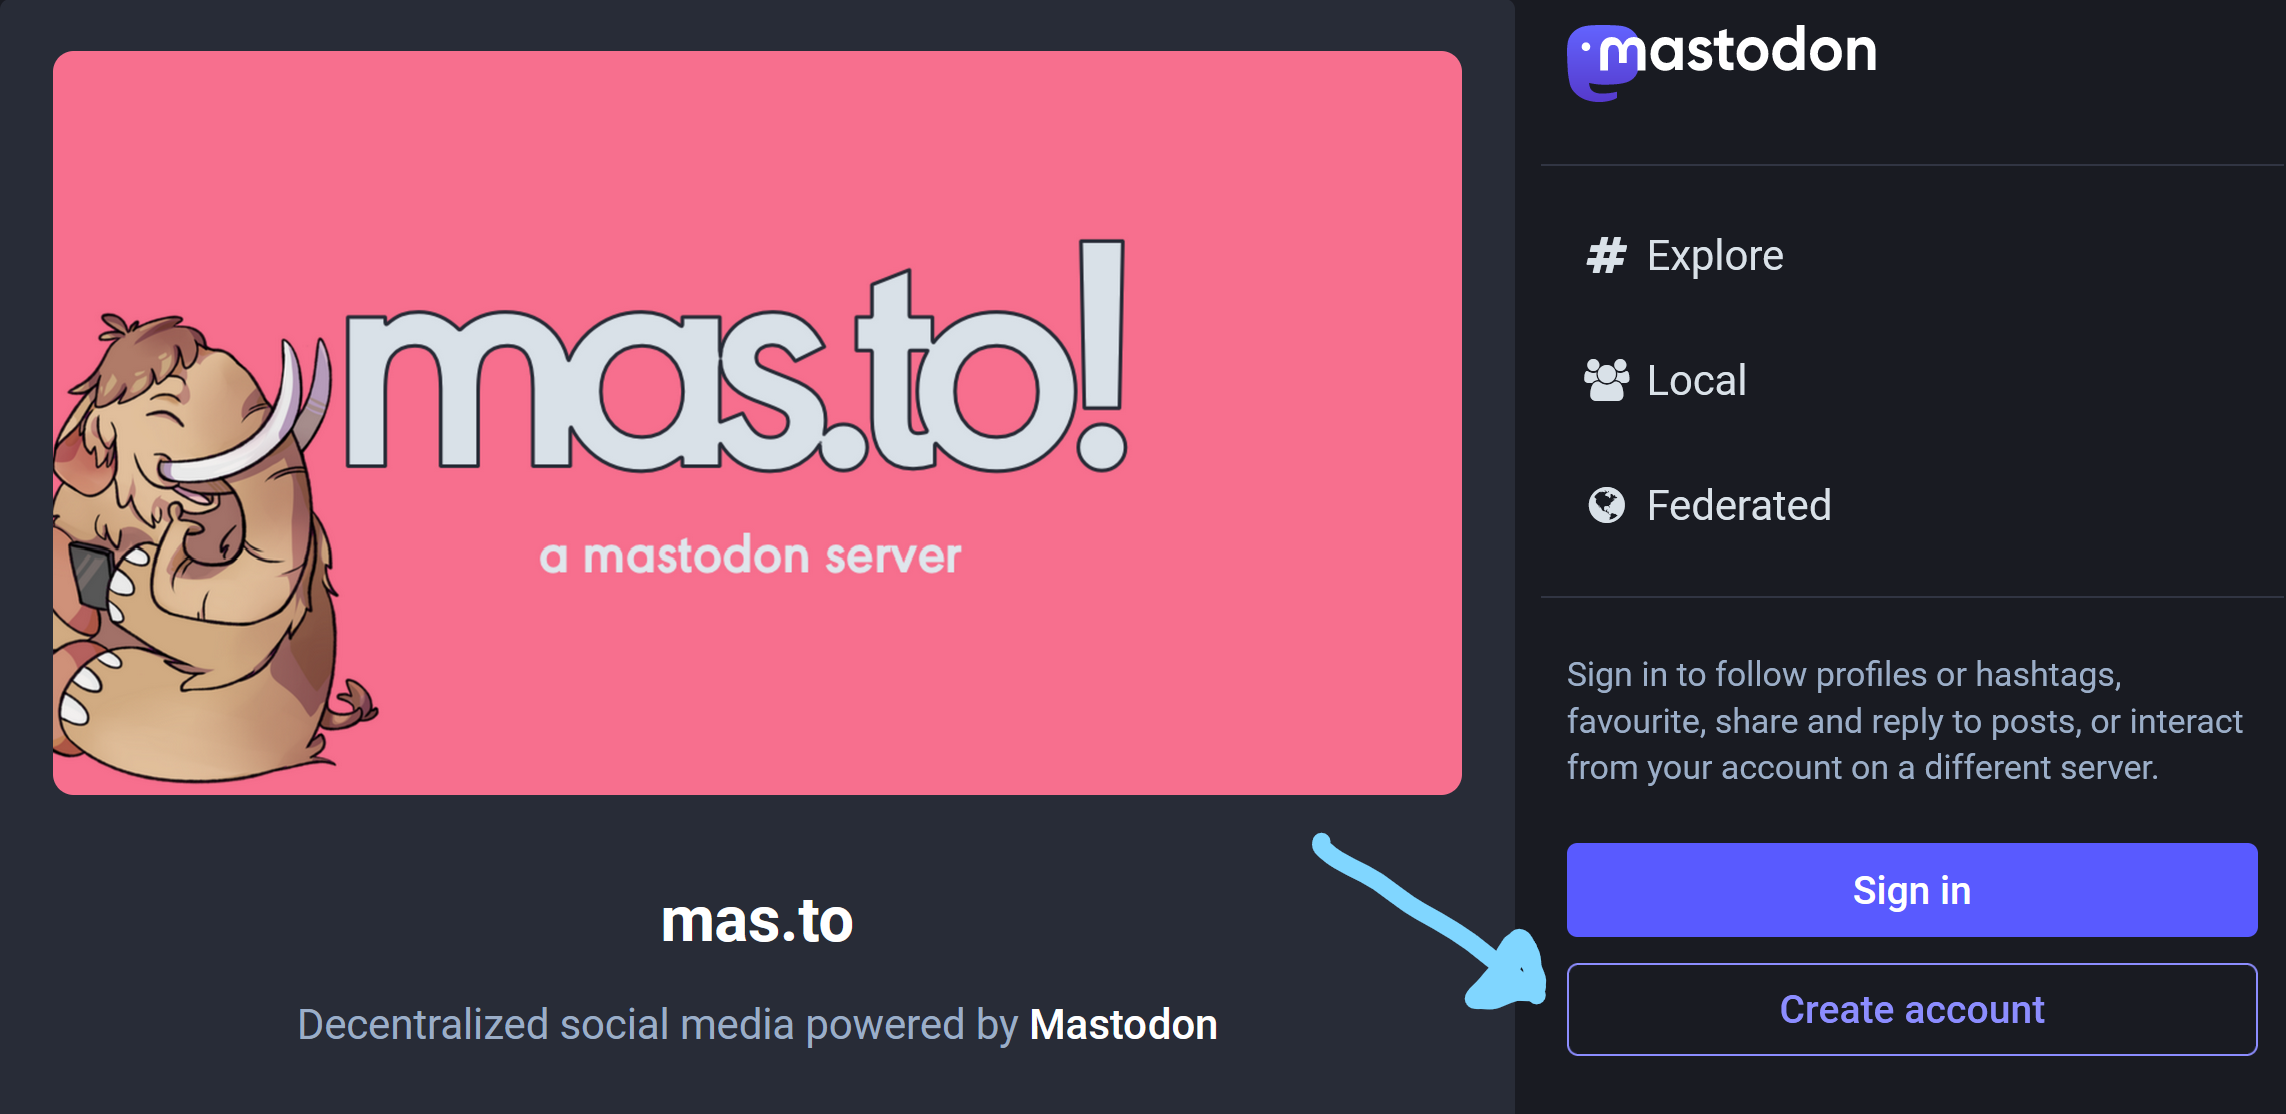 Screenshot of the desktop version of the mas.to signup page linked above, with a presentational banner image of the mas.to logo above a heading of the server name. The Create Account button is in the left sidebar under the sign in button. It is effectively at the end of the page and not under any headings.